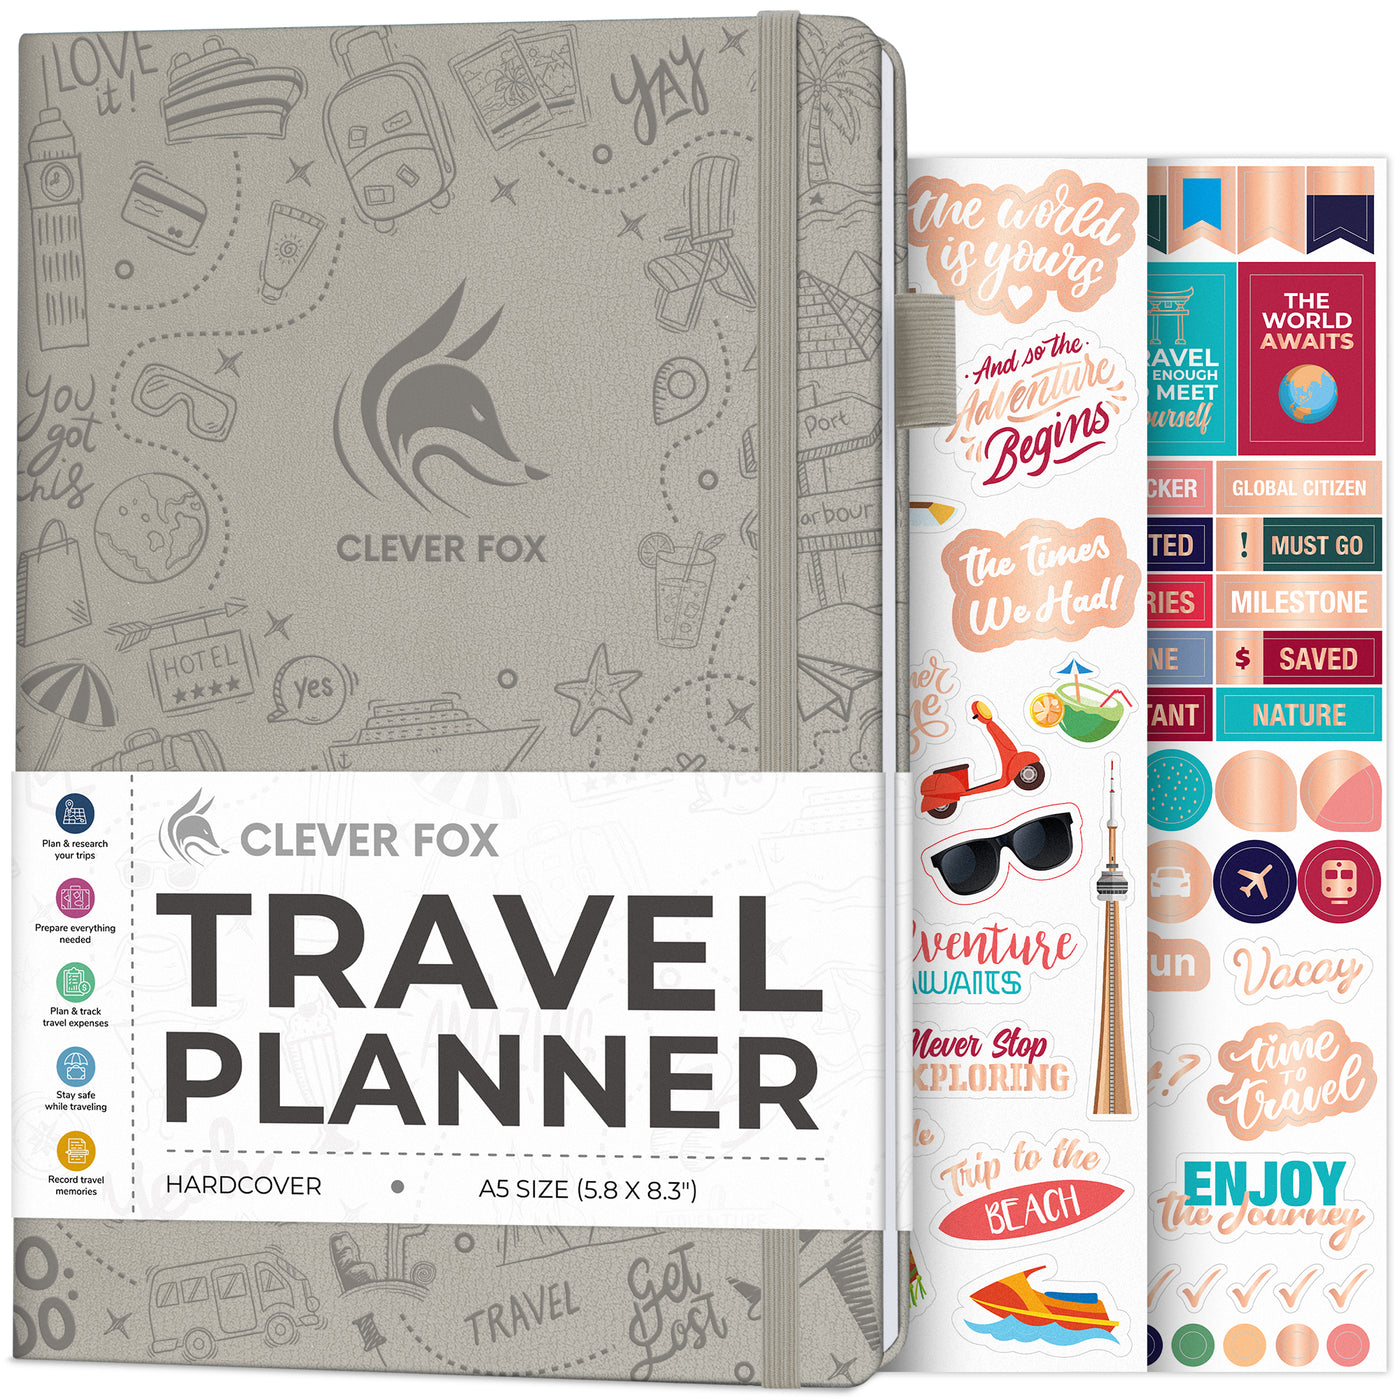 Toledo Travel Journal: A Fun Travel Planner to Record your Trip to